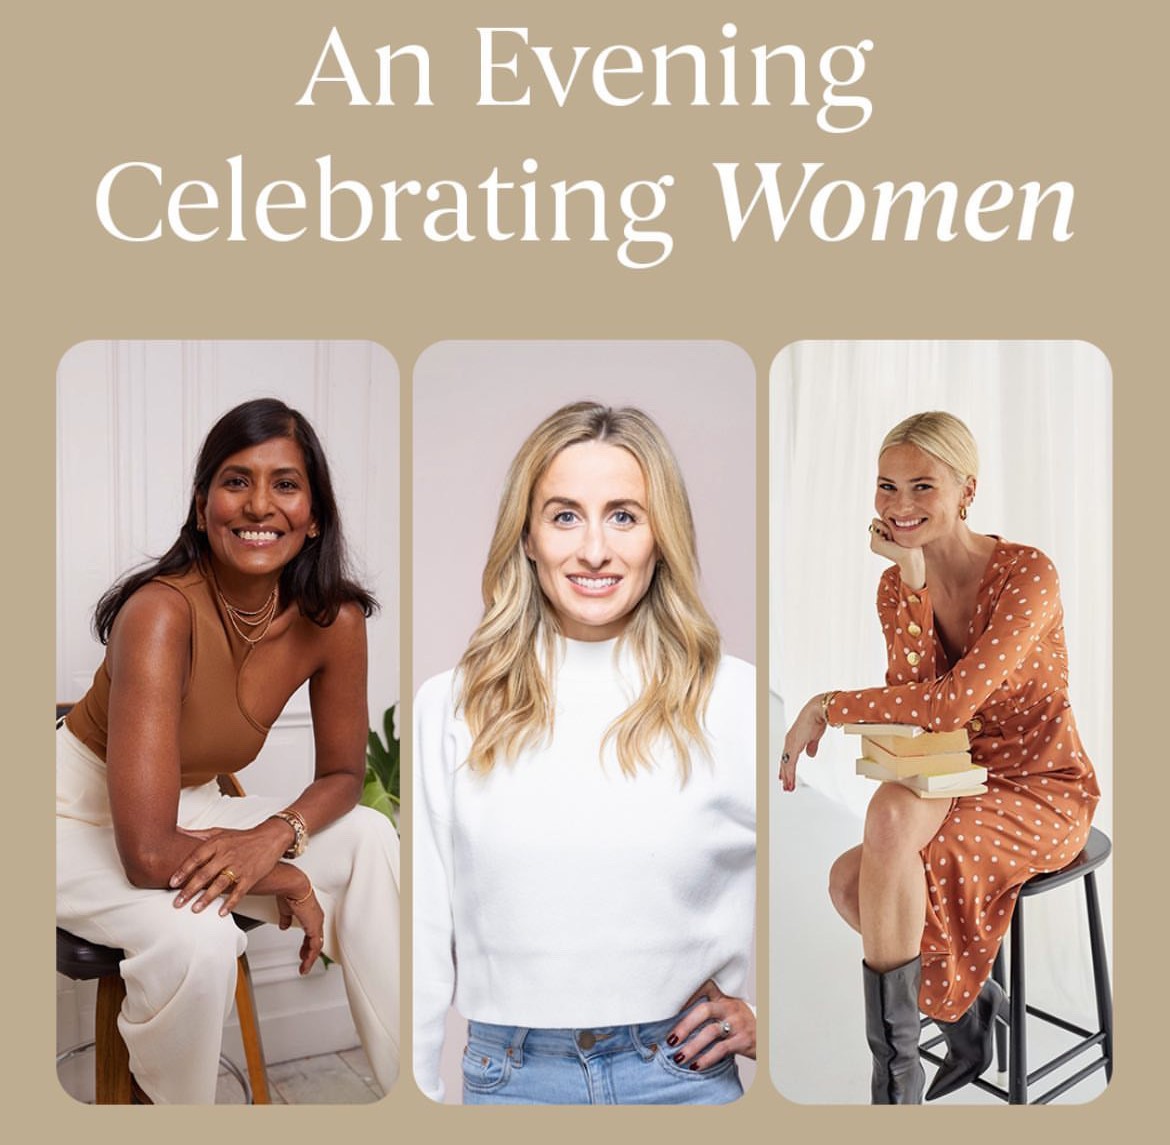 Evening Celebrating Women with Dr Julie Smith, Pandora Sykes & Ruby Hammer